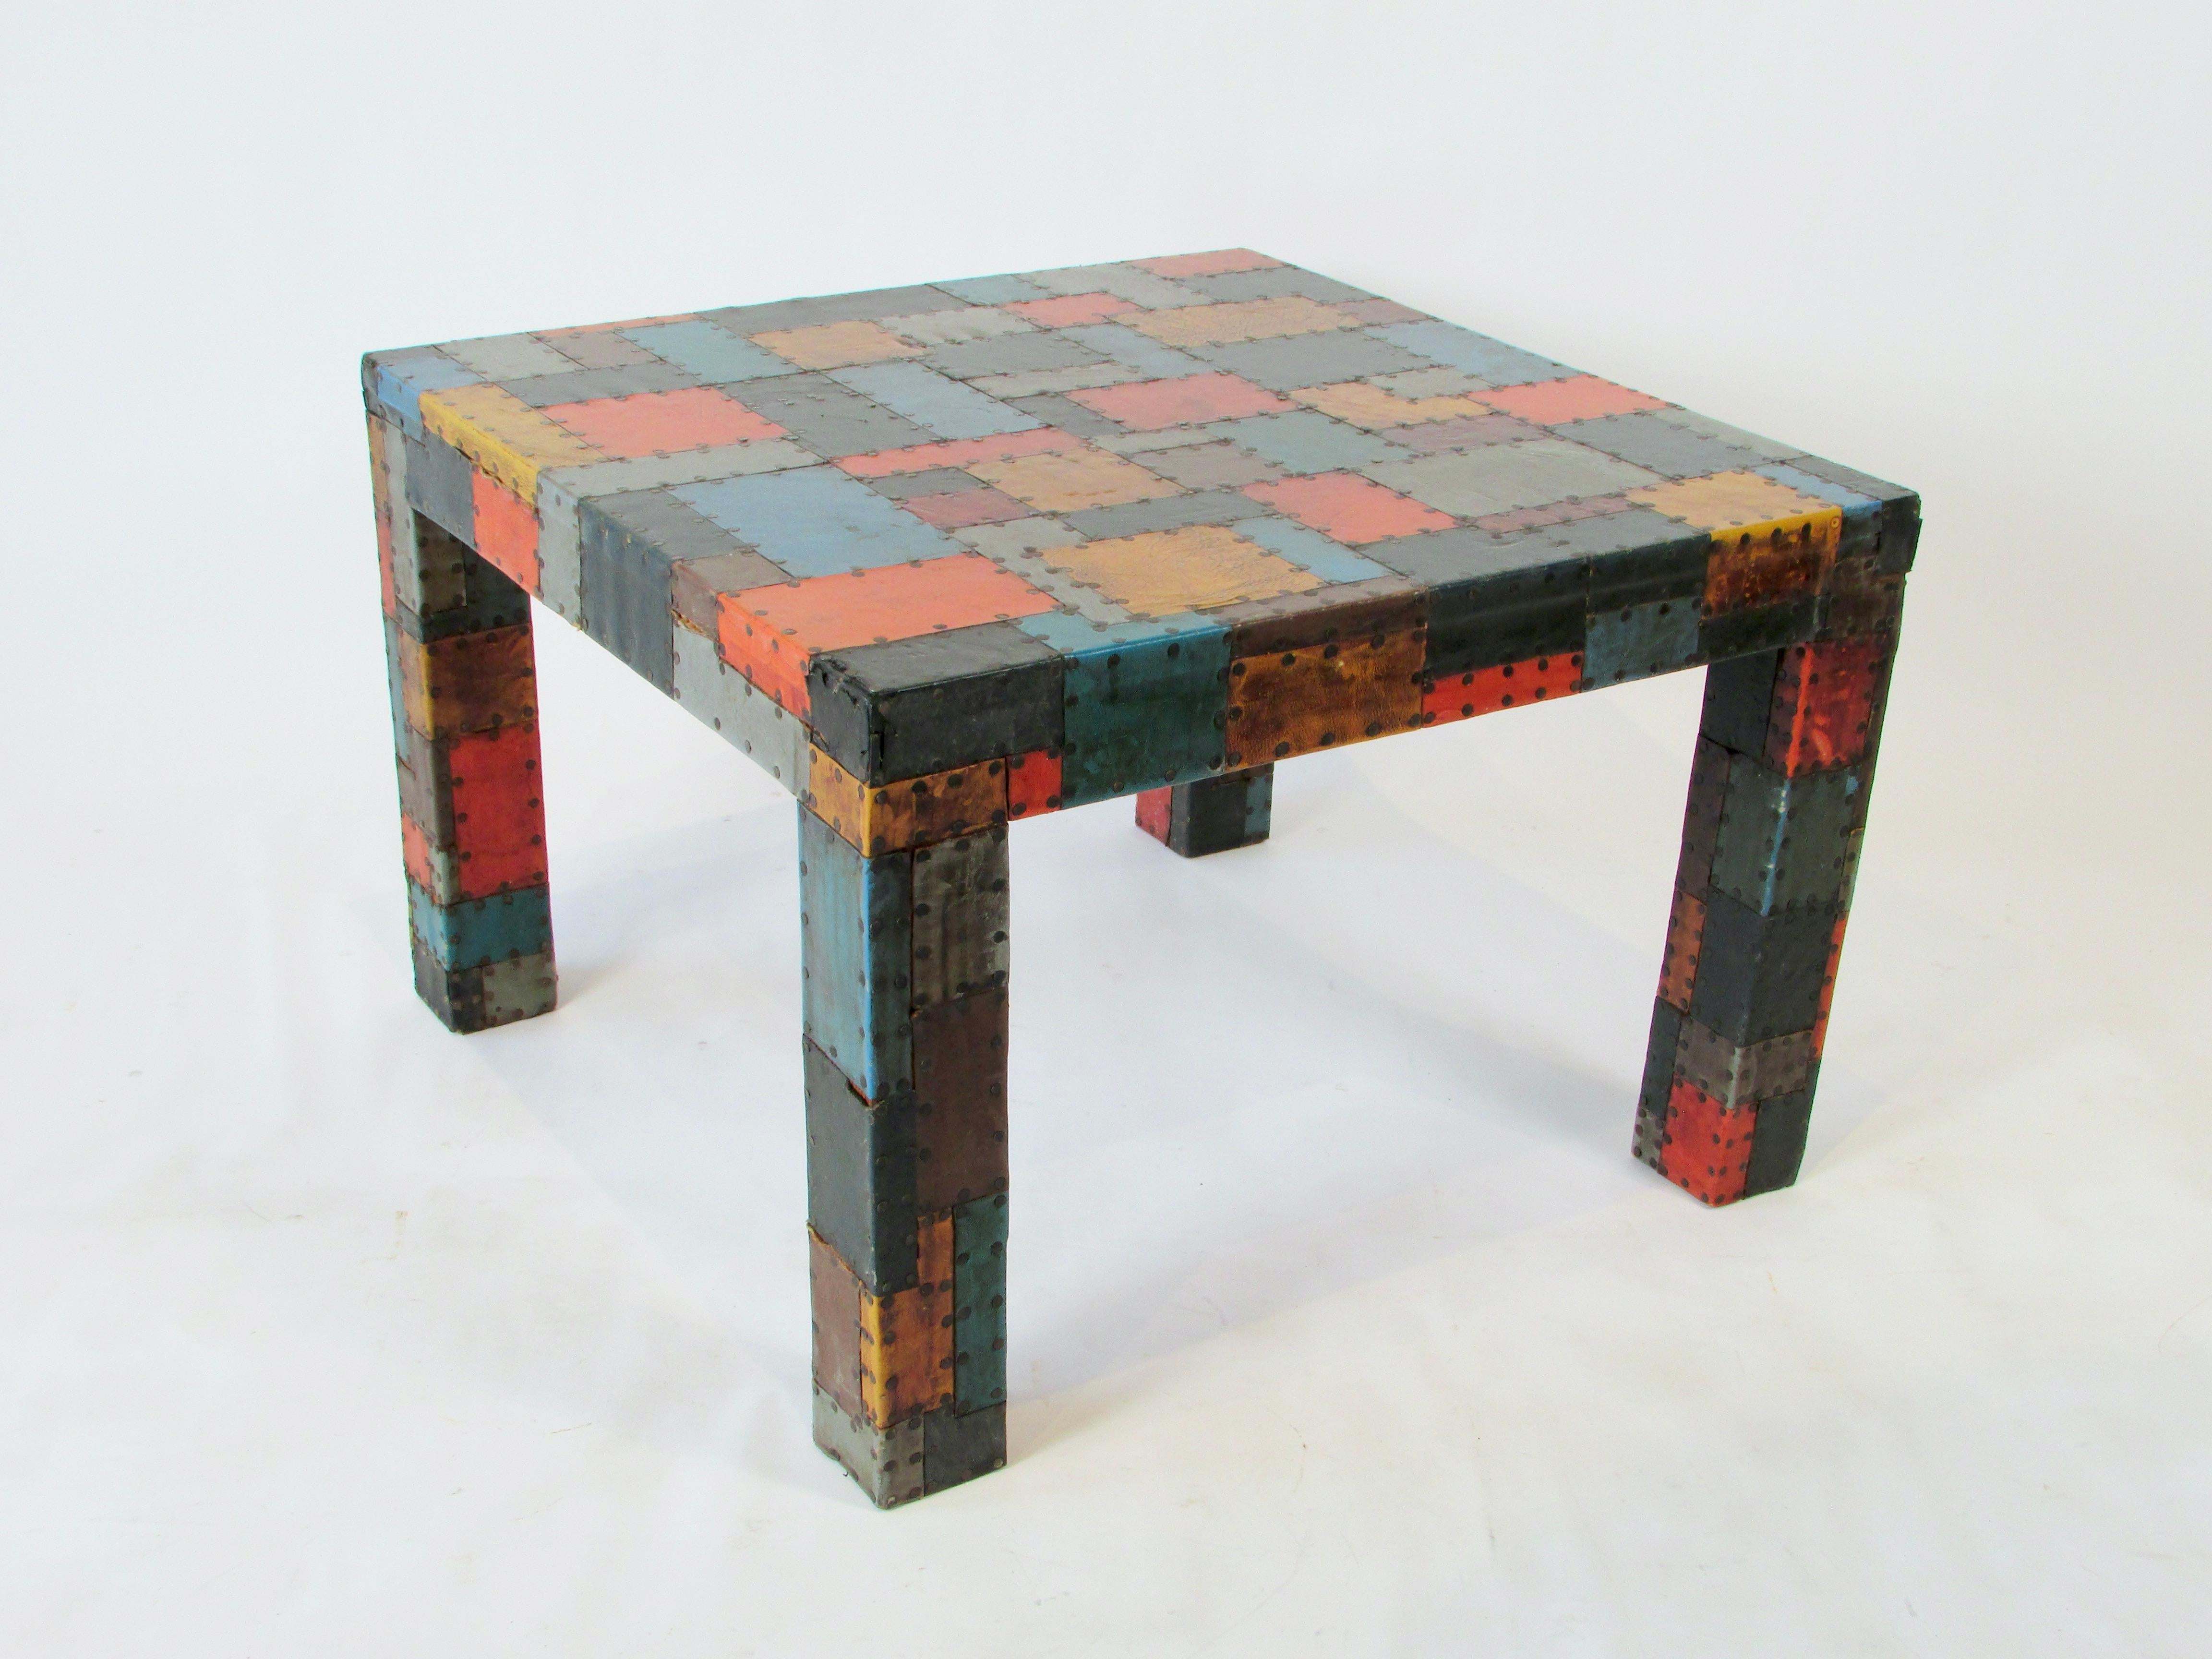 20th Century Organic 1960s Folk Art Table with Hammered Nail Multi Color Leather Patchwork For Sale